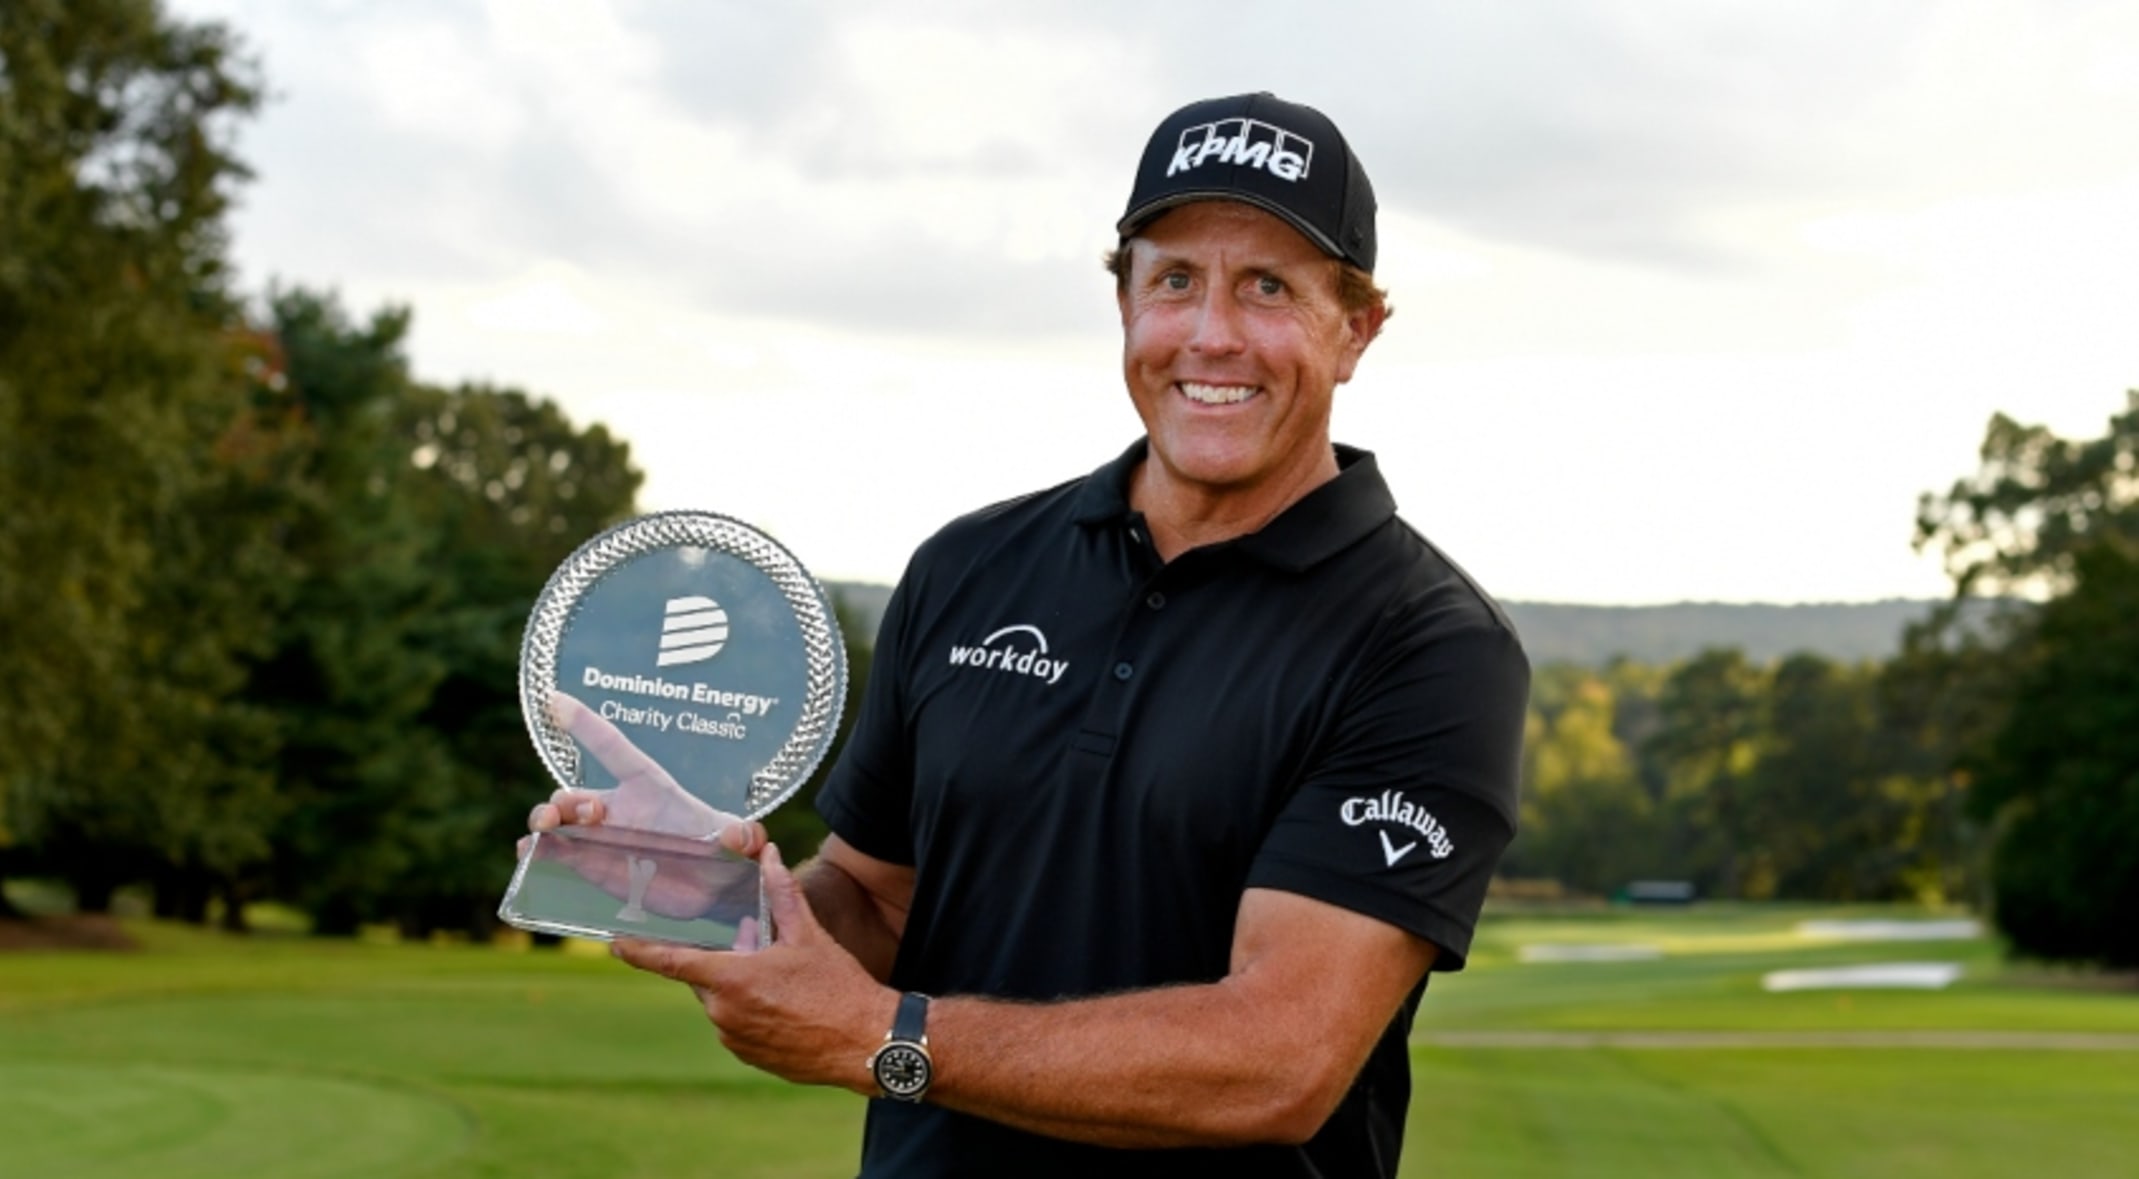 Defending champion Phil Mickelson